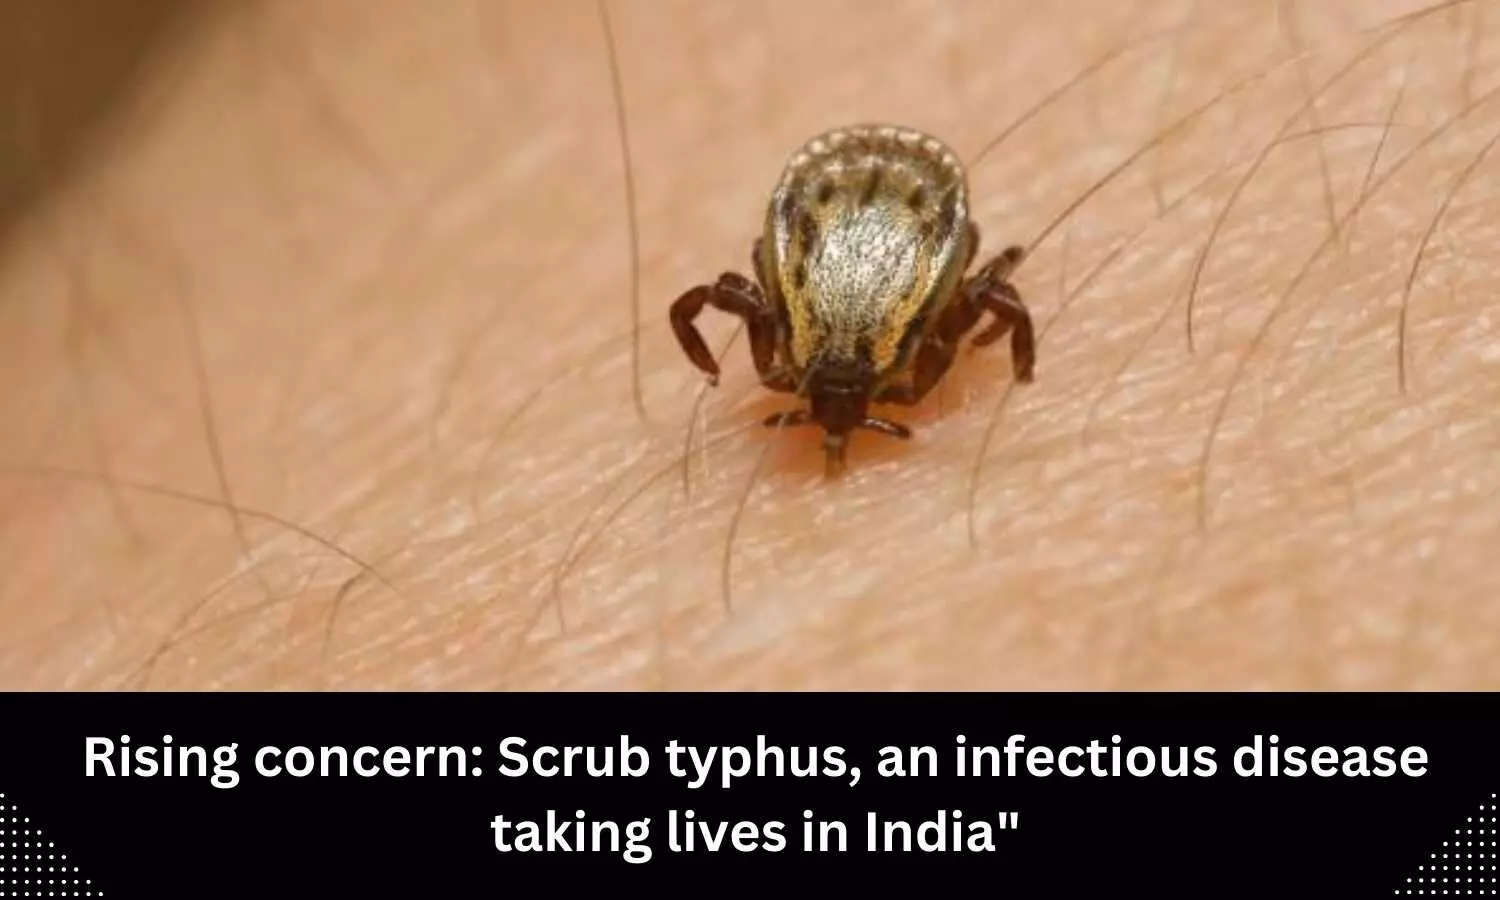 Rising concern: Scrub typhus, an infectious disease taking lives in India